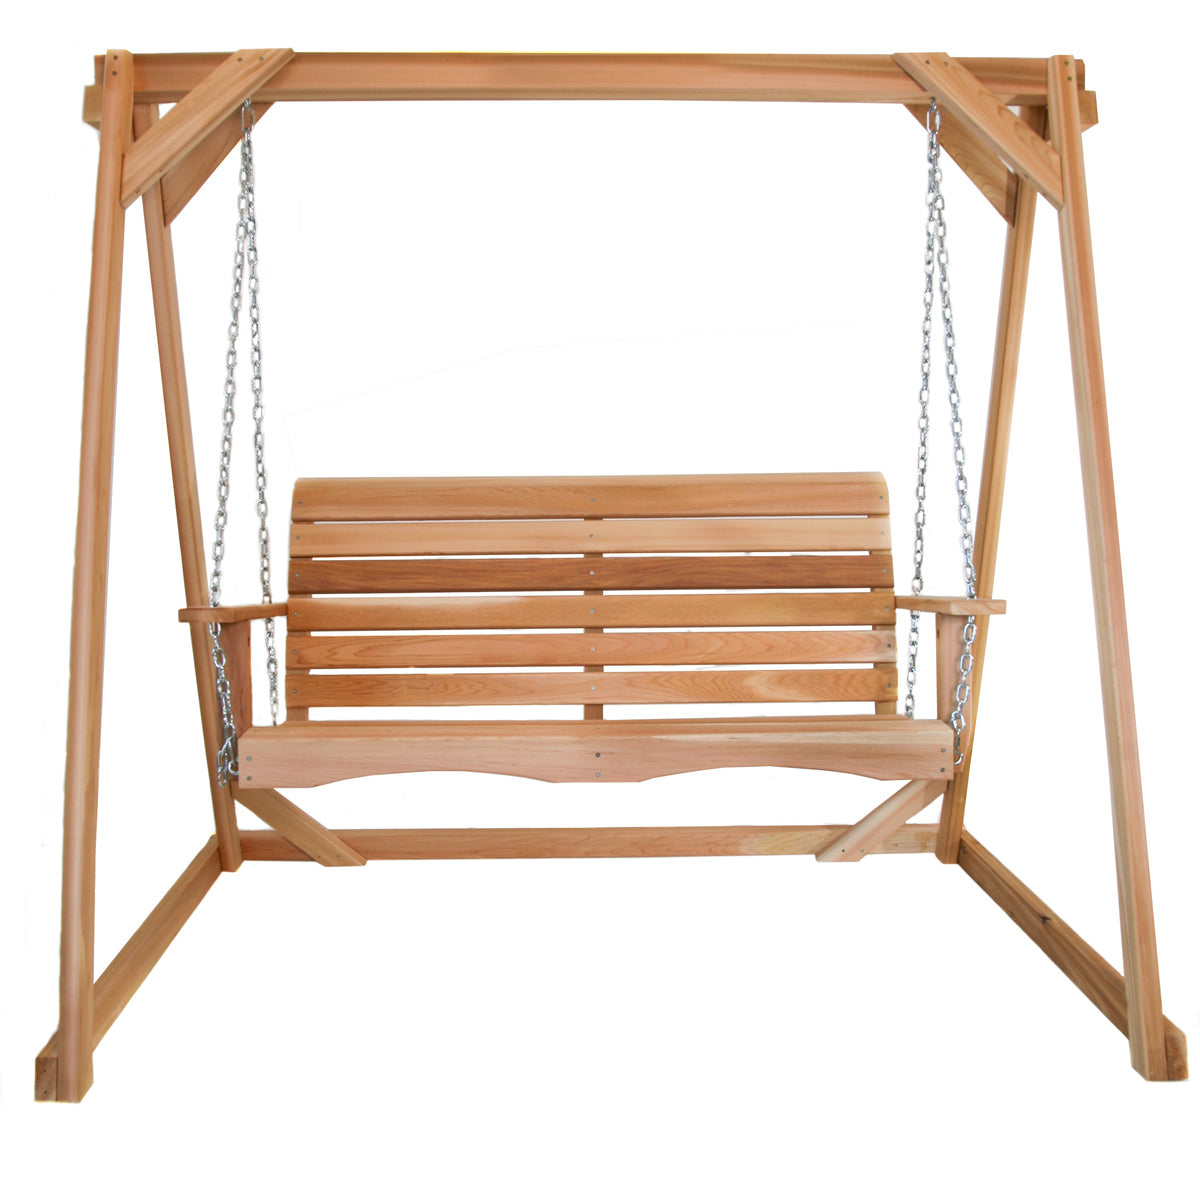 Porch Swing Benches & Beds